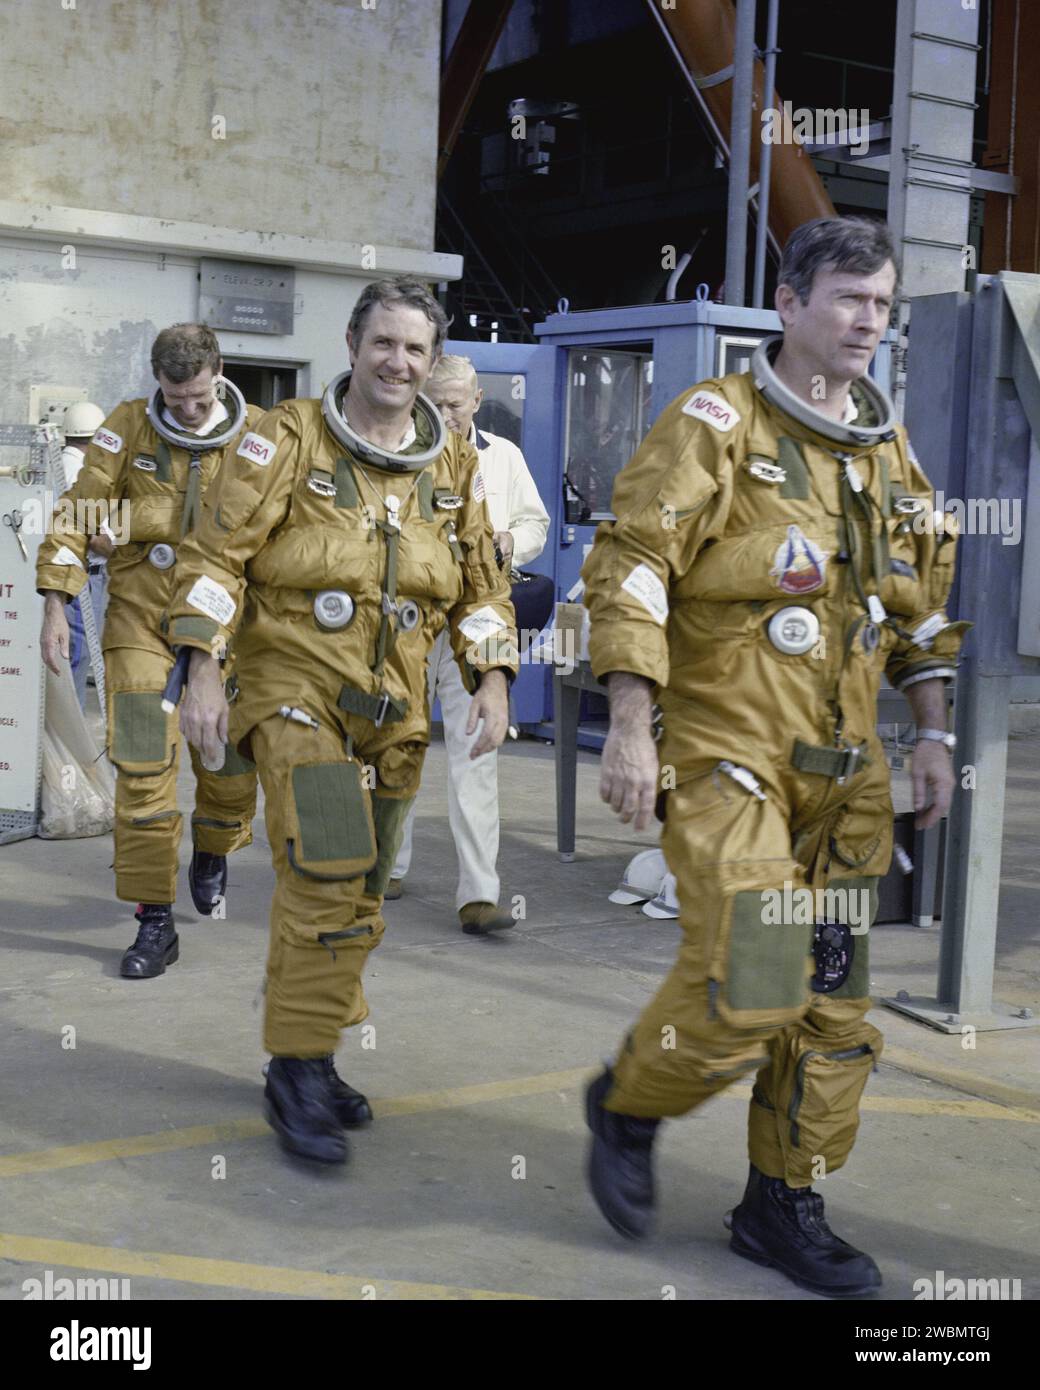 KENNEDY SPACE CENTER, FLA. - Space Shuttle prime and backup astronaut crews are preparing to be briefed on the use of the emergency pad escape system, known as the “slidewire”. From left to right are backup astronauts Joe Engle and Richard Truly, and primary crew Commander John Young. Both the prime and backup crews wore the spacesuits and other equipment they will wear during a mission. The slidewire system provides a quick and sure escape from the upper pad platforms in case of a serious emergency. The flight crews wore the spacesuits and other equipment to be worn during a mission, but sand Stock Photo